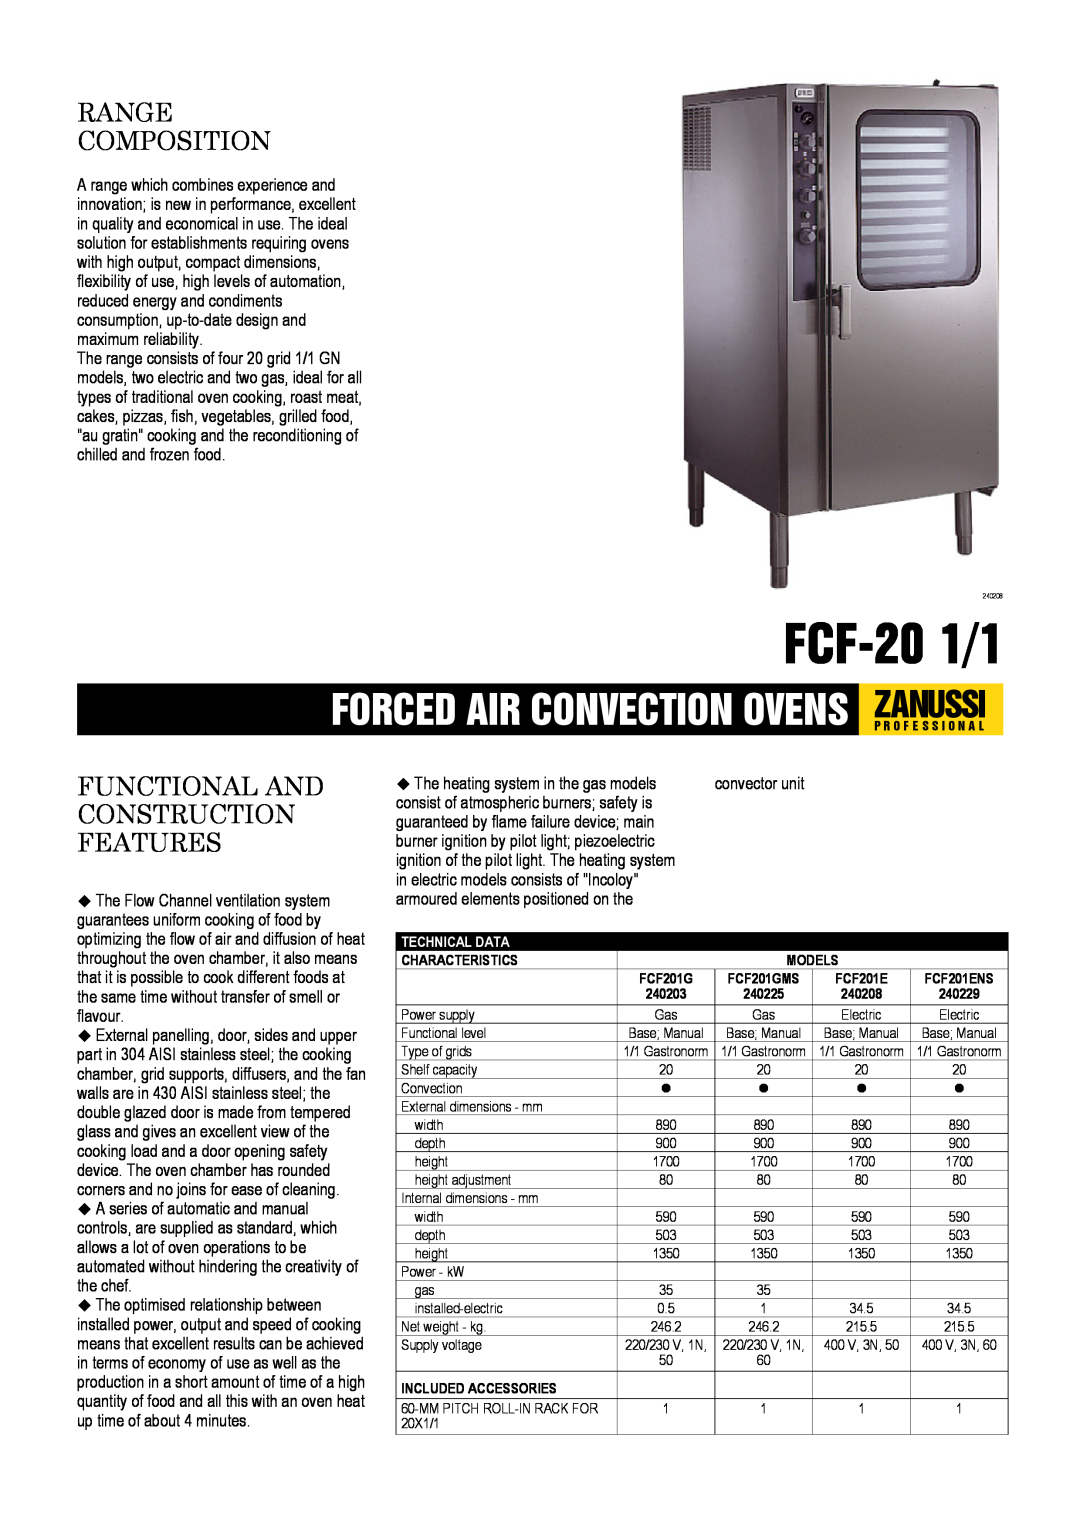 Zanussi 240203, 240229, 240208, 240225 dimensions FCF-201/1, Range Composition, Functional And Construction Features 